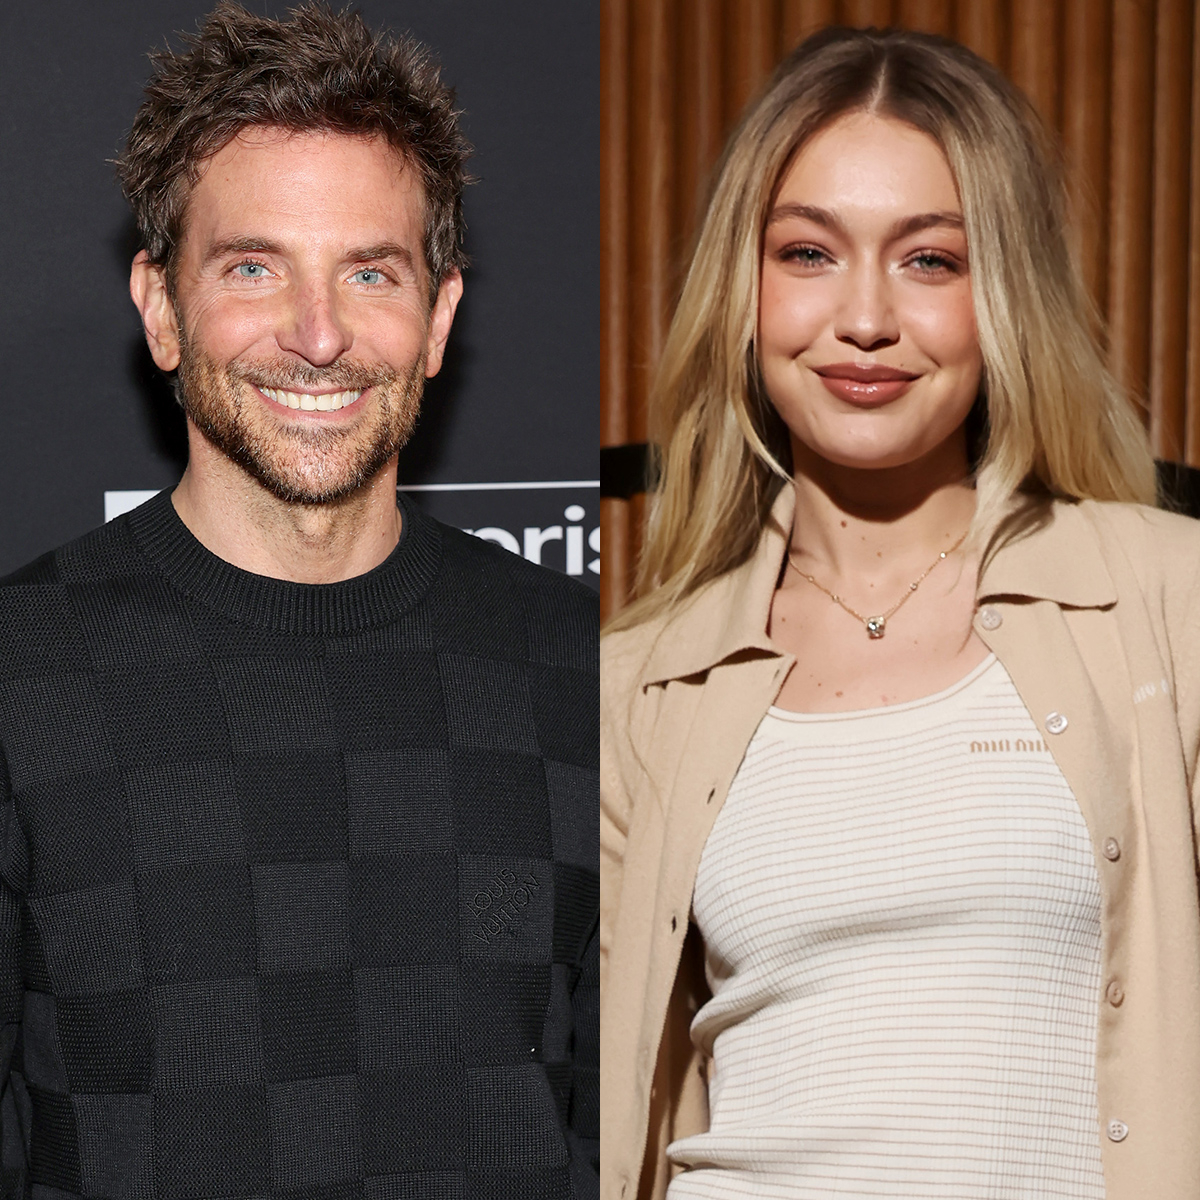 https://akns-images.eonline.com/eol_images/Entire_Site/2024215/rs_1200x1200-240315141401-bradley-cooper-gigi-hadid-thumb.jpg?fit=around%7C660:372&output-quality=90&crop=660:372;center,top